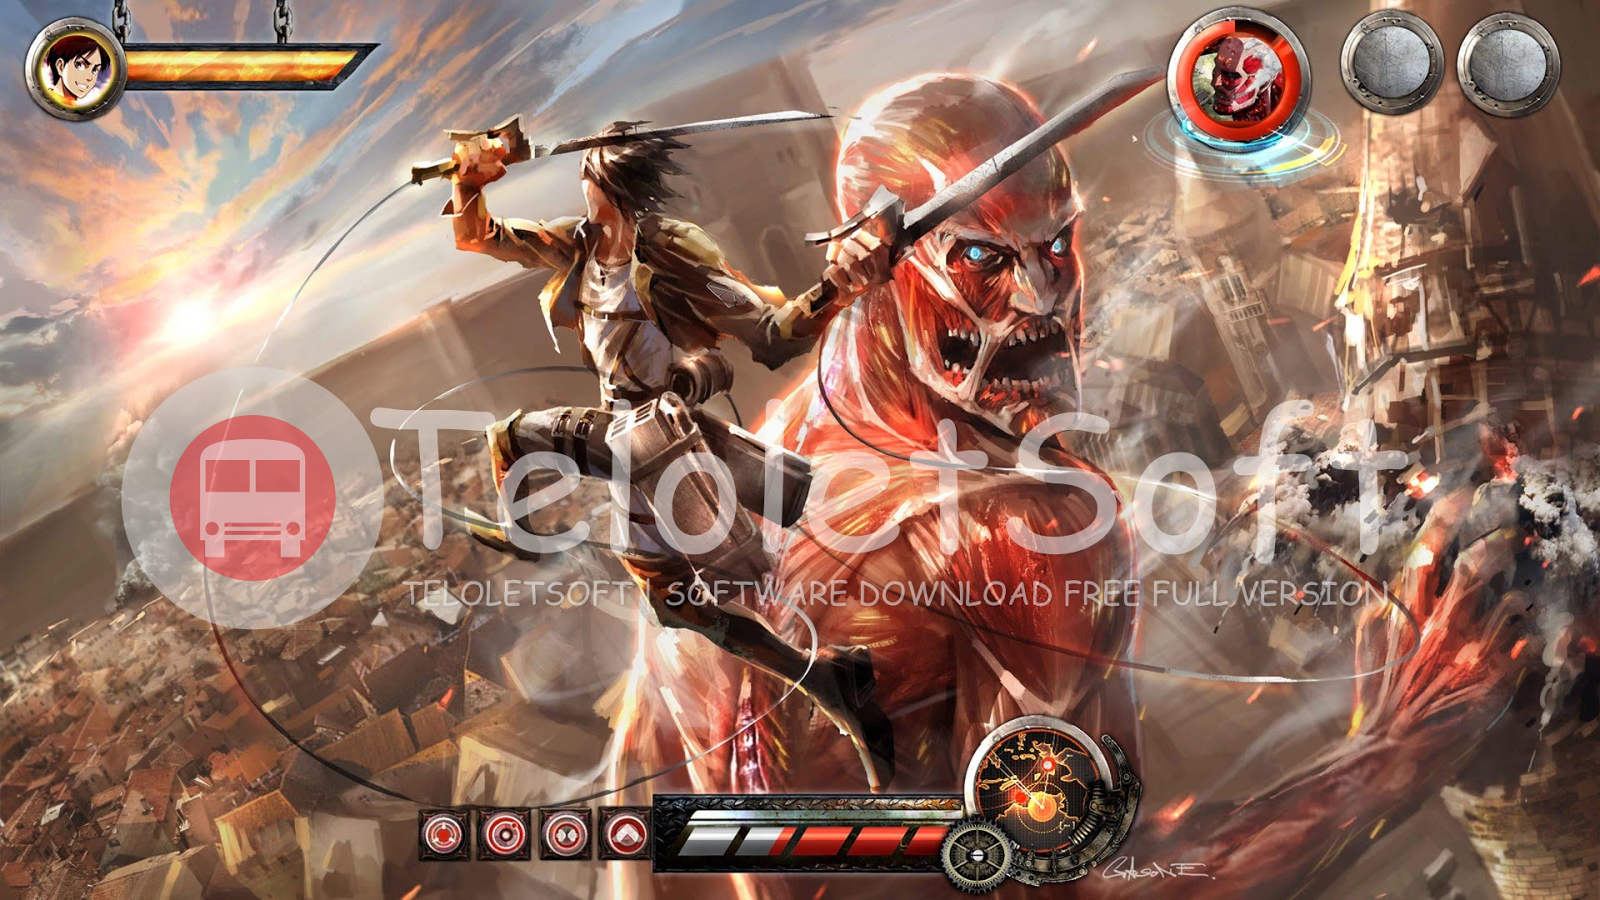 Attack On Titan Wings Of Freedom Full Repack And Free Download Teloletsoft Software Download Free Full Version